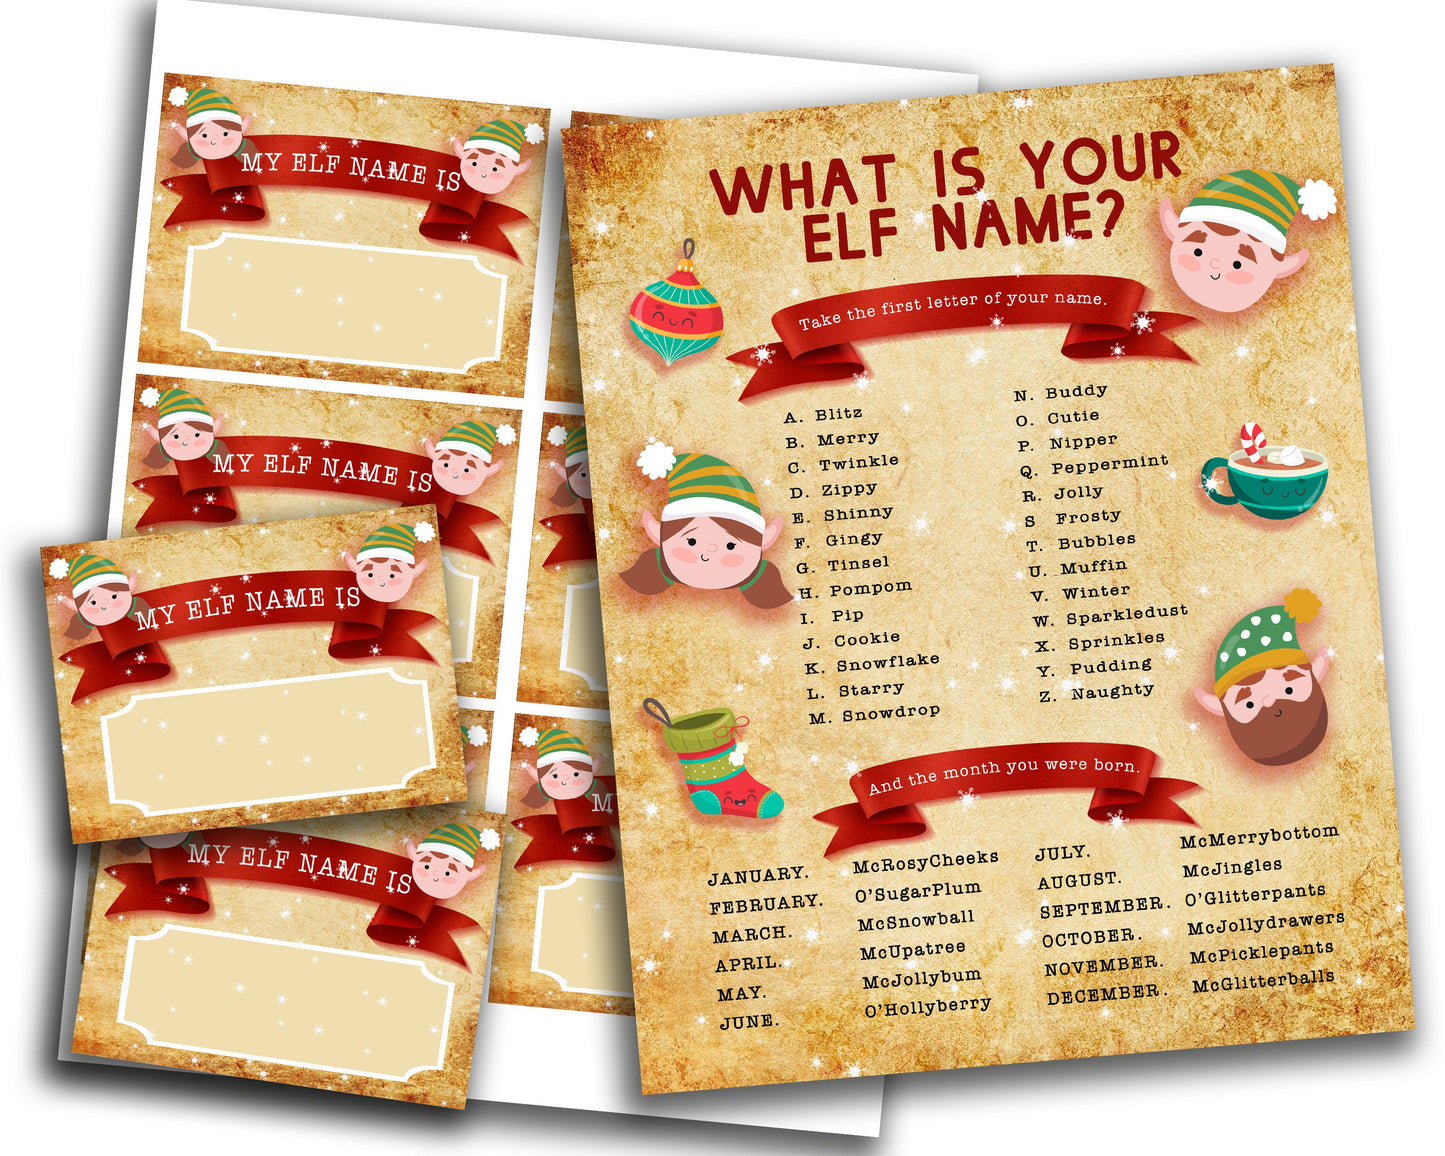 What's your Elf Name?